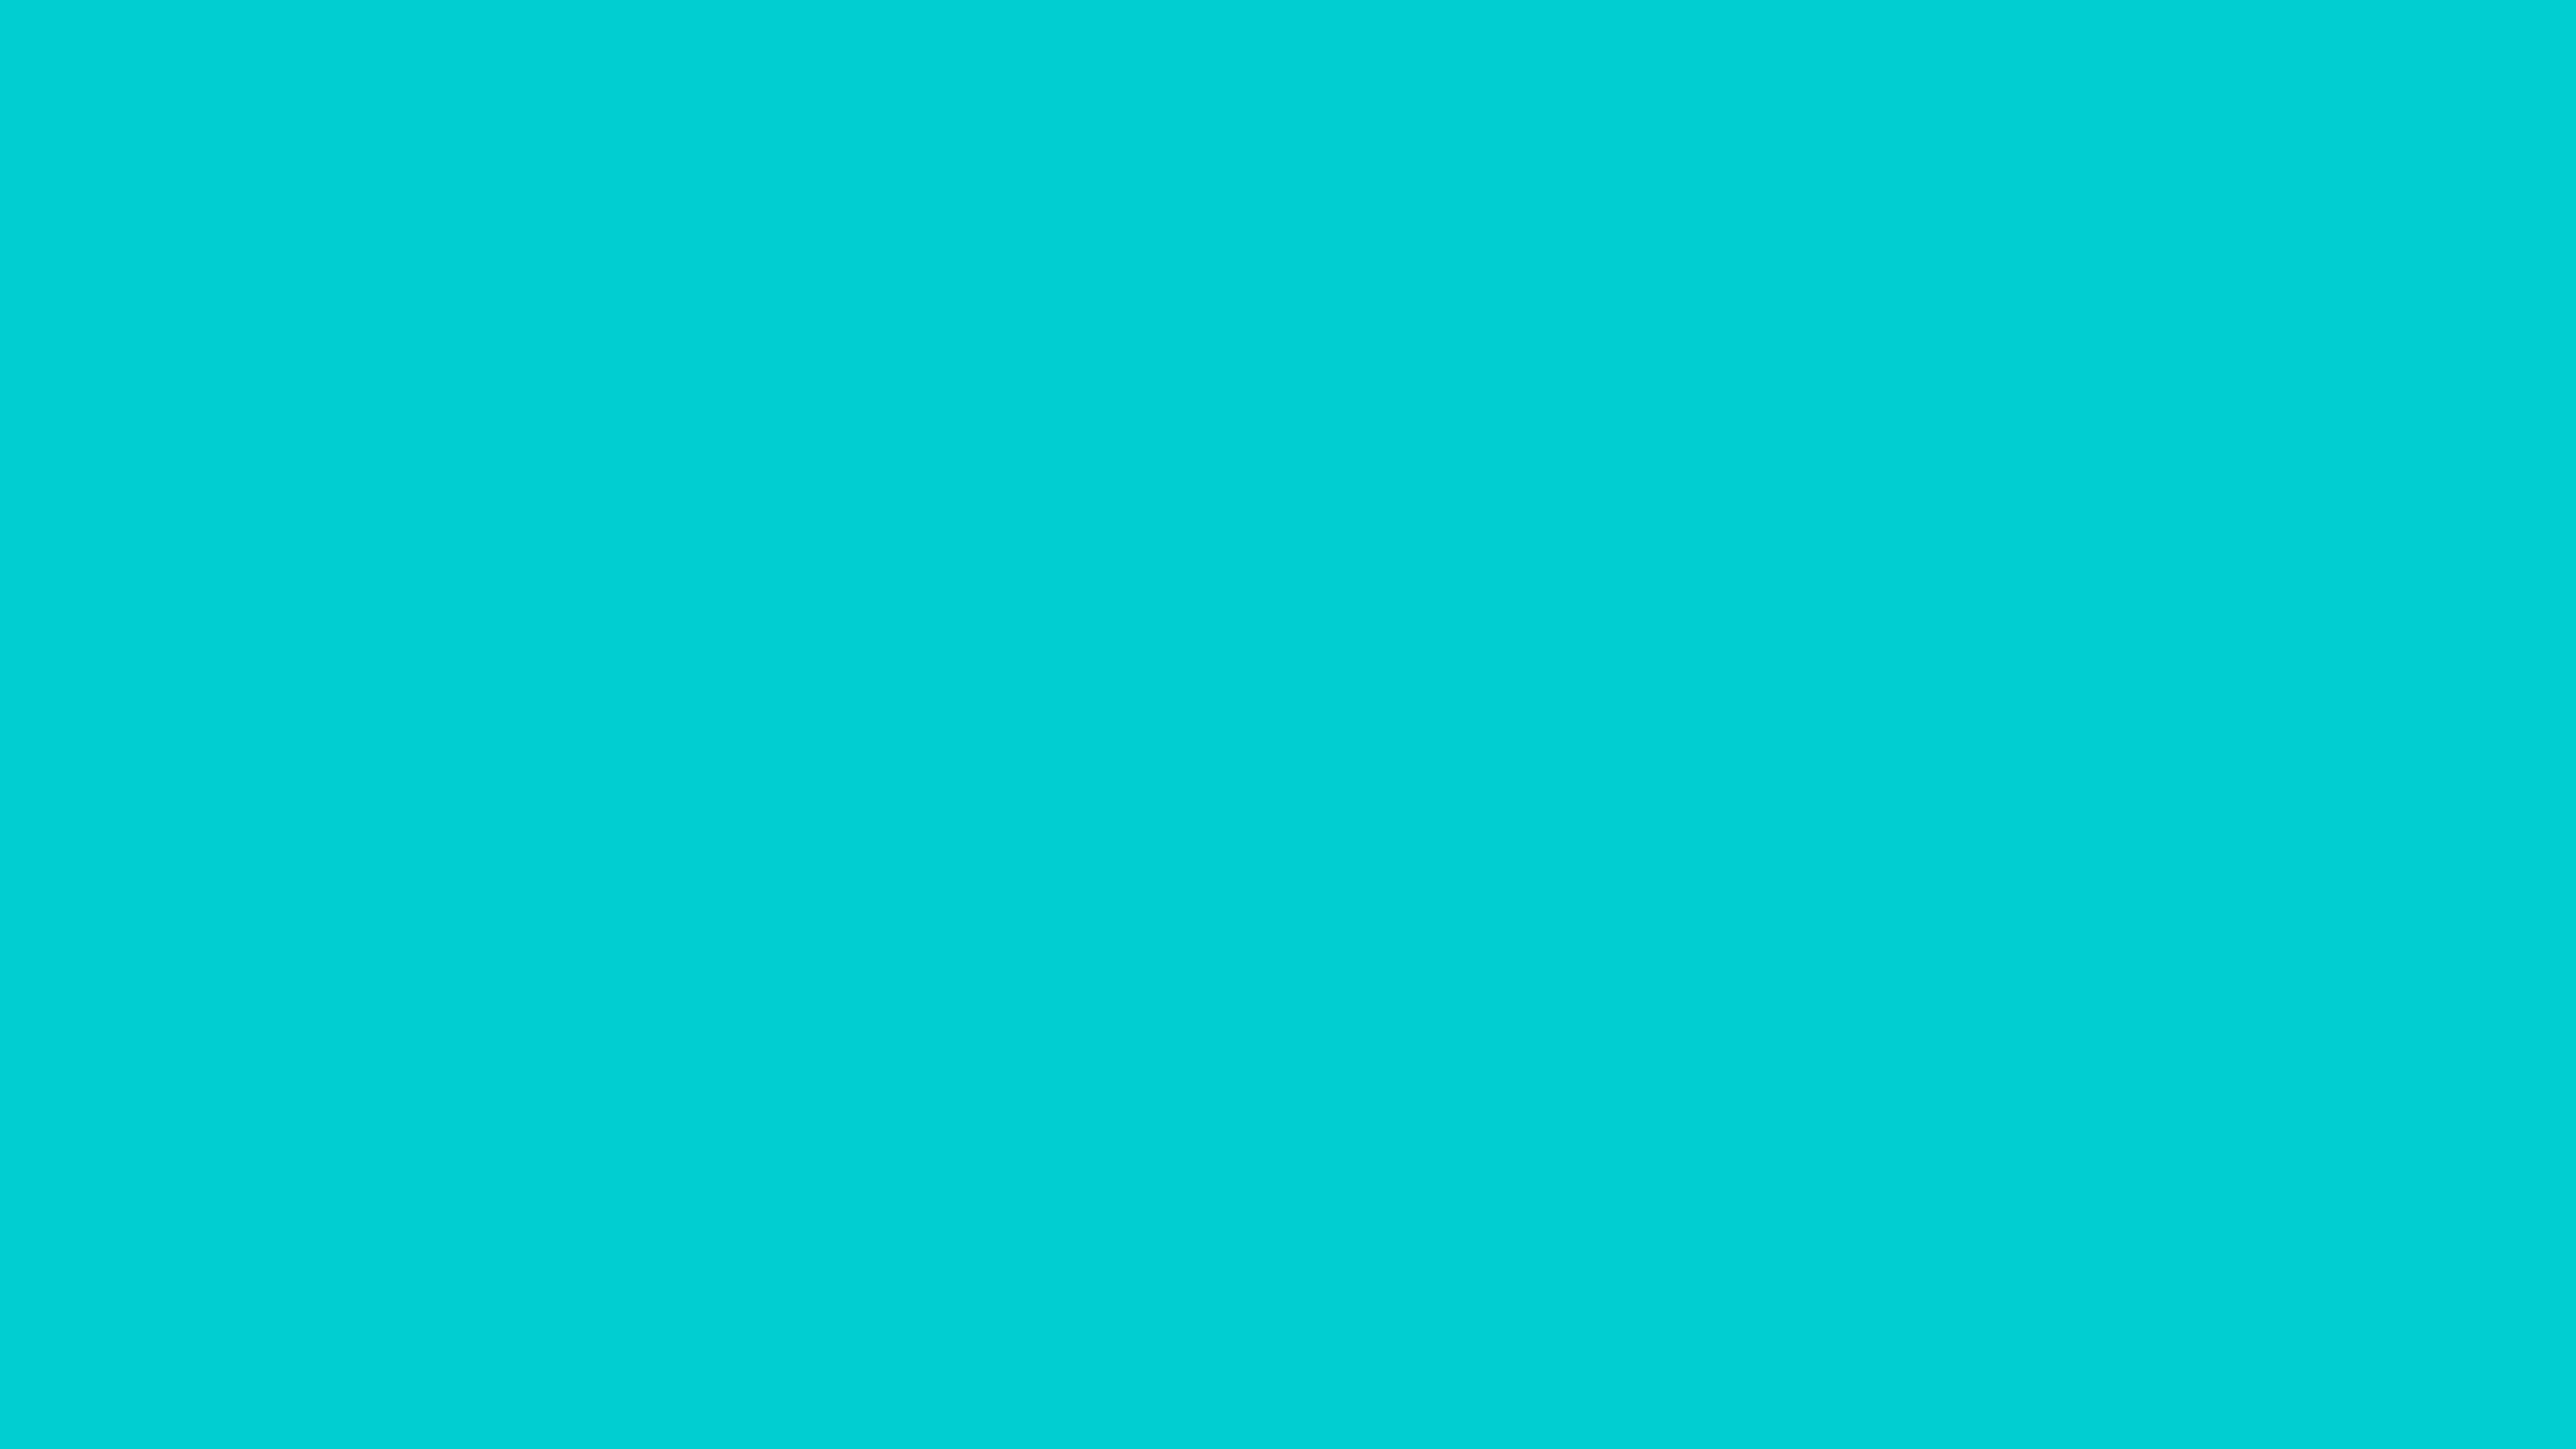 3840x2160 Dark Turquoise Solid Color Background